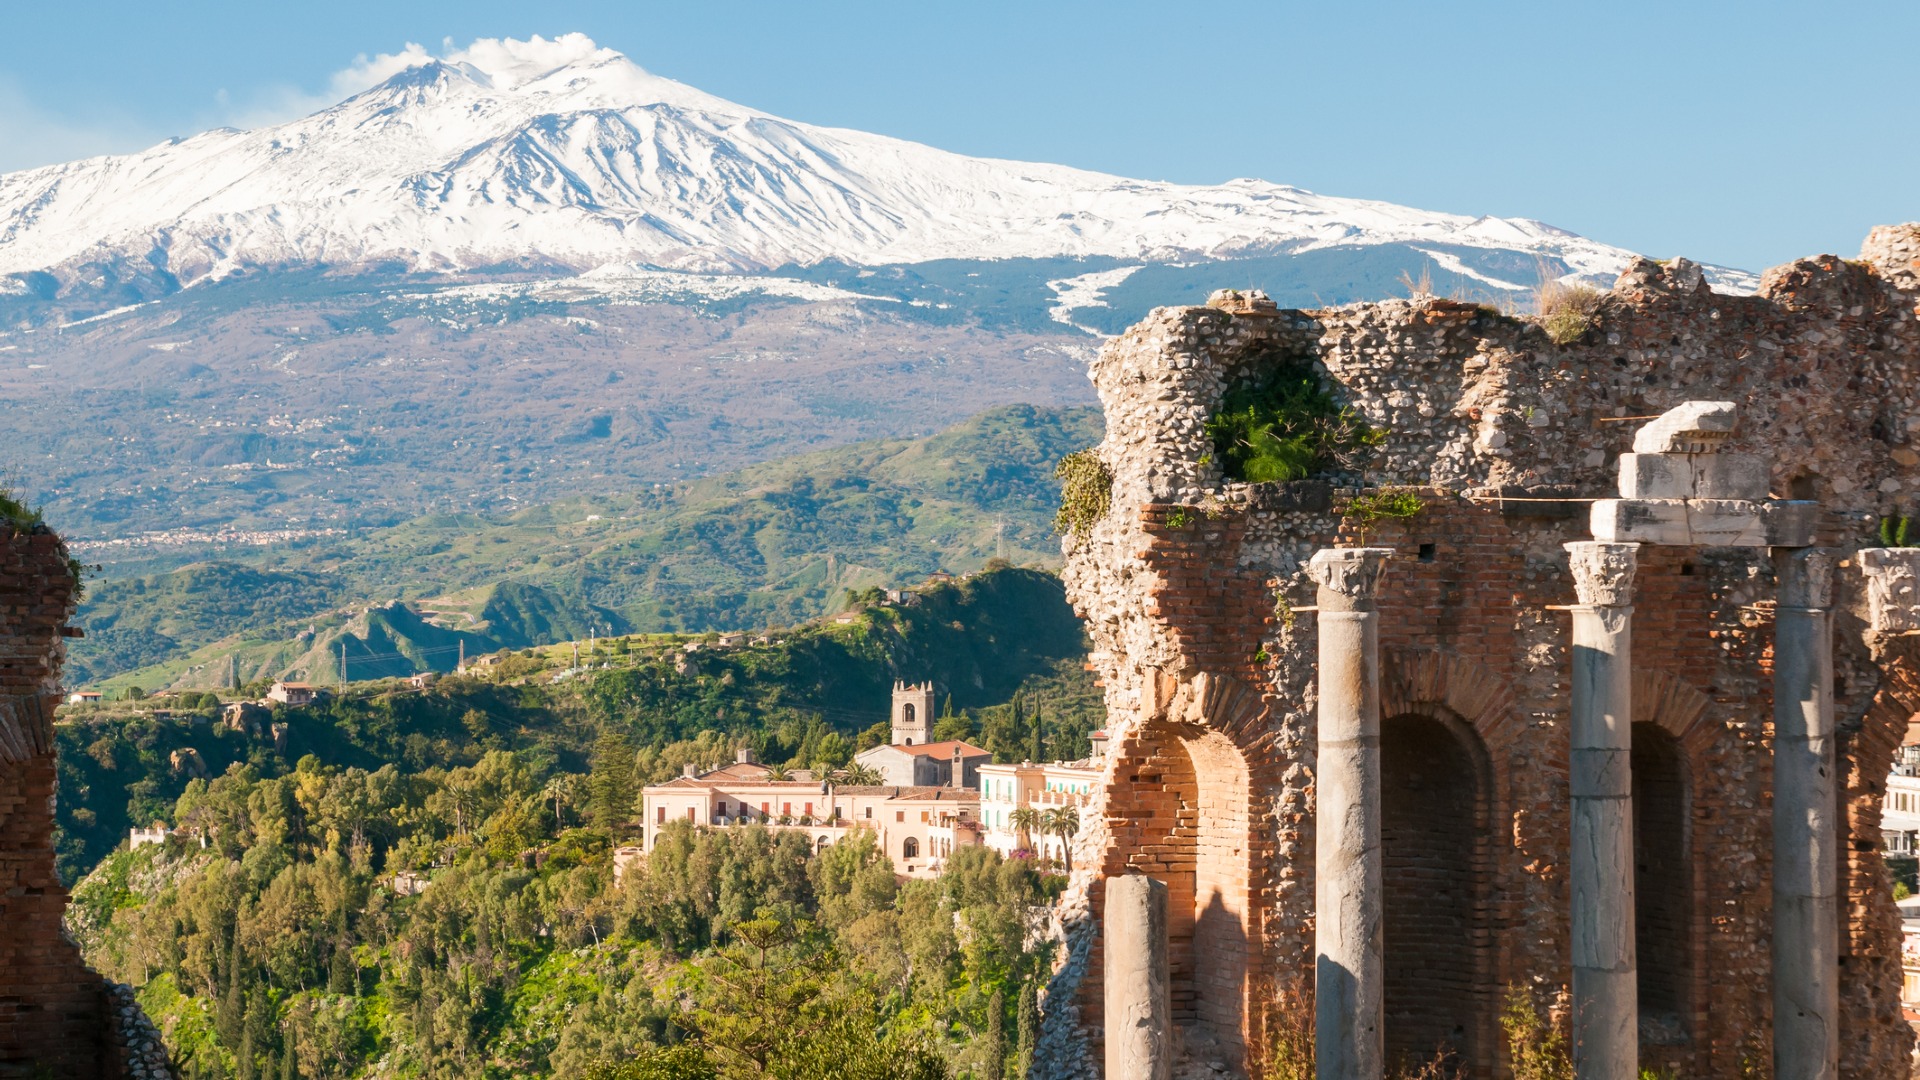 This image shows some ancient columns in Taormina with a snowcapped Etna Mountain in the background.